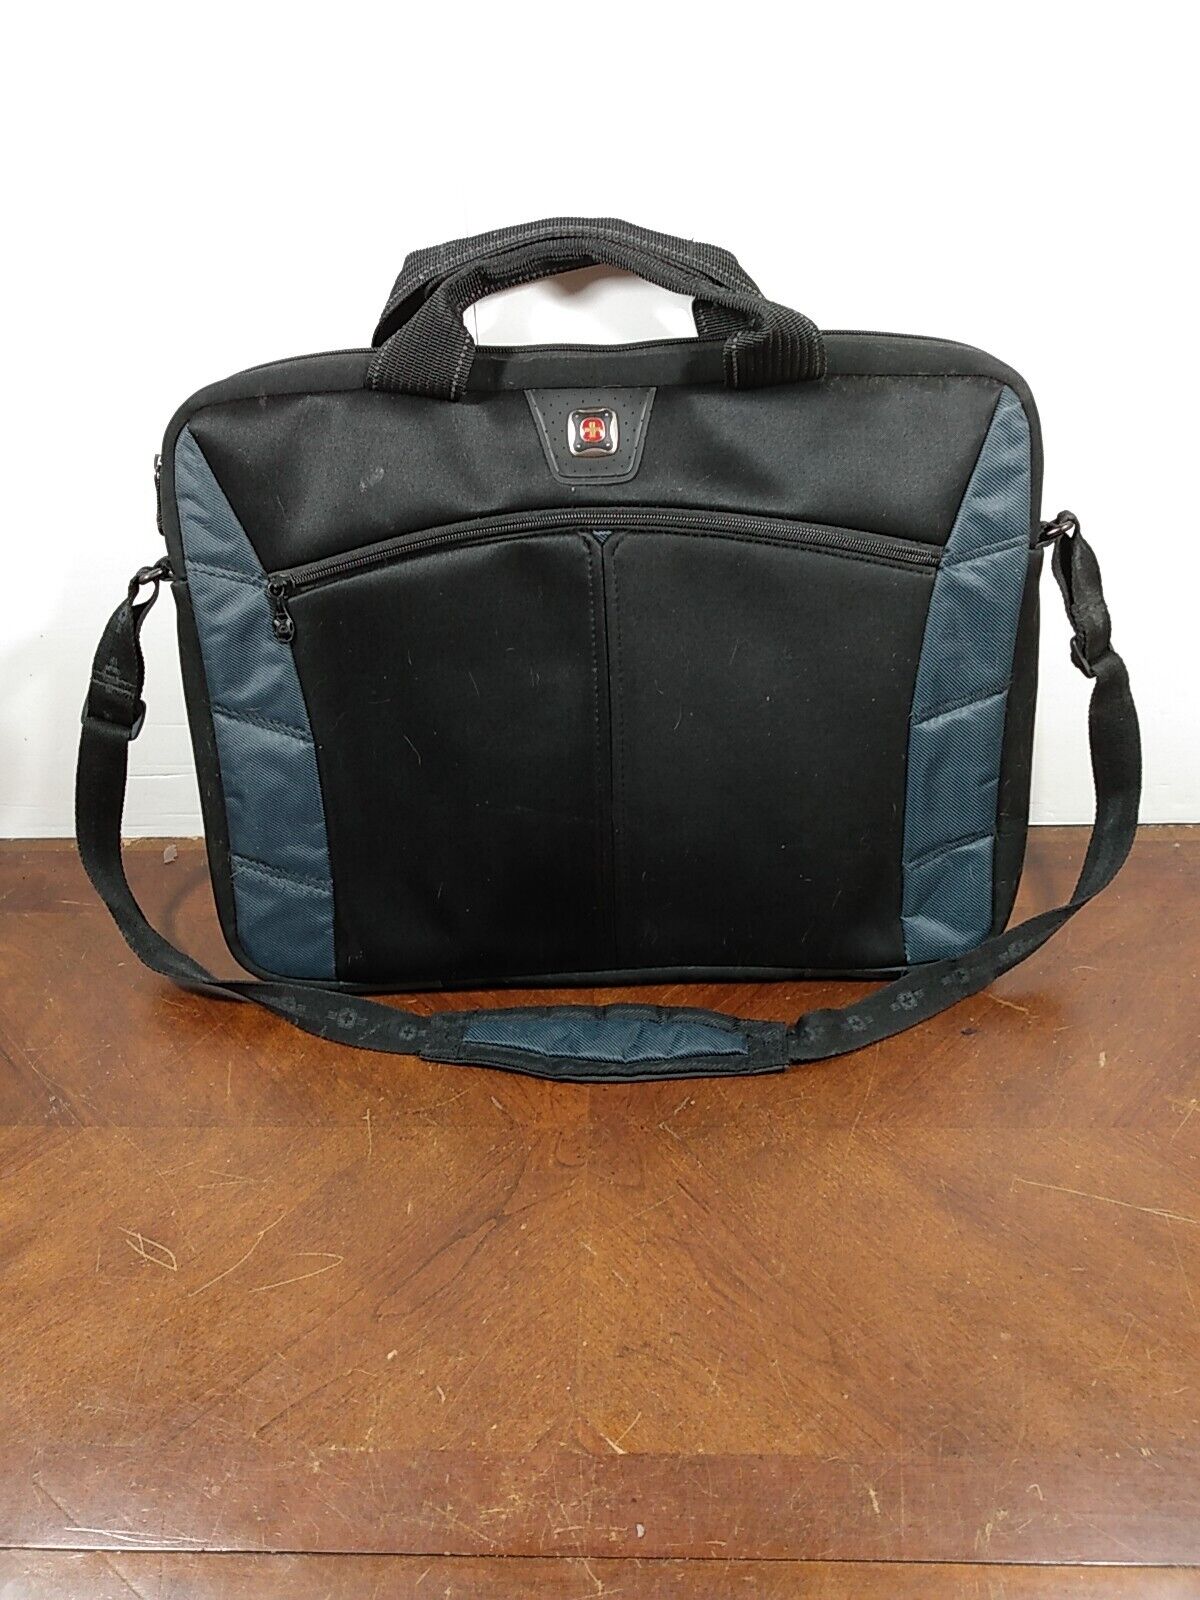 Wenger Swiss Gear Swiss Army Laptop Bag W/ Strap 16x 12 Very Nice Fast Shipping